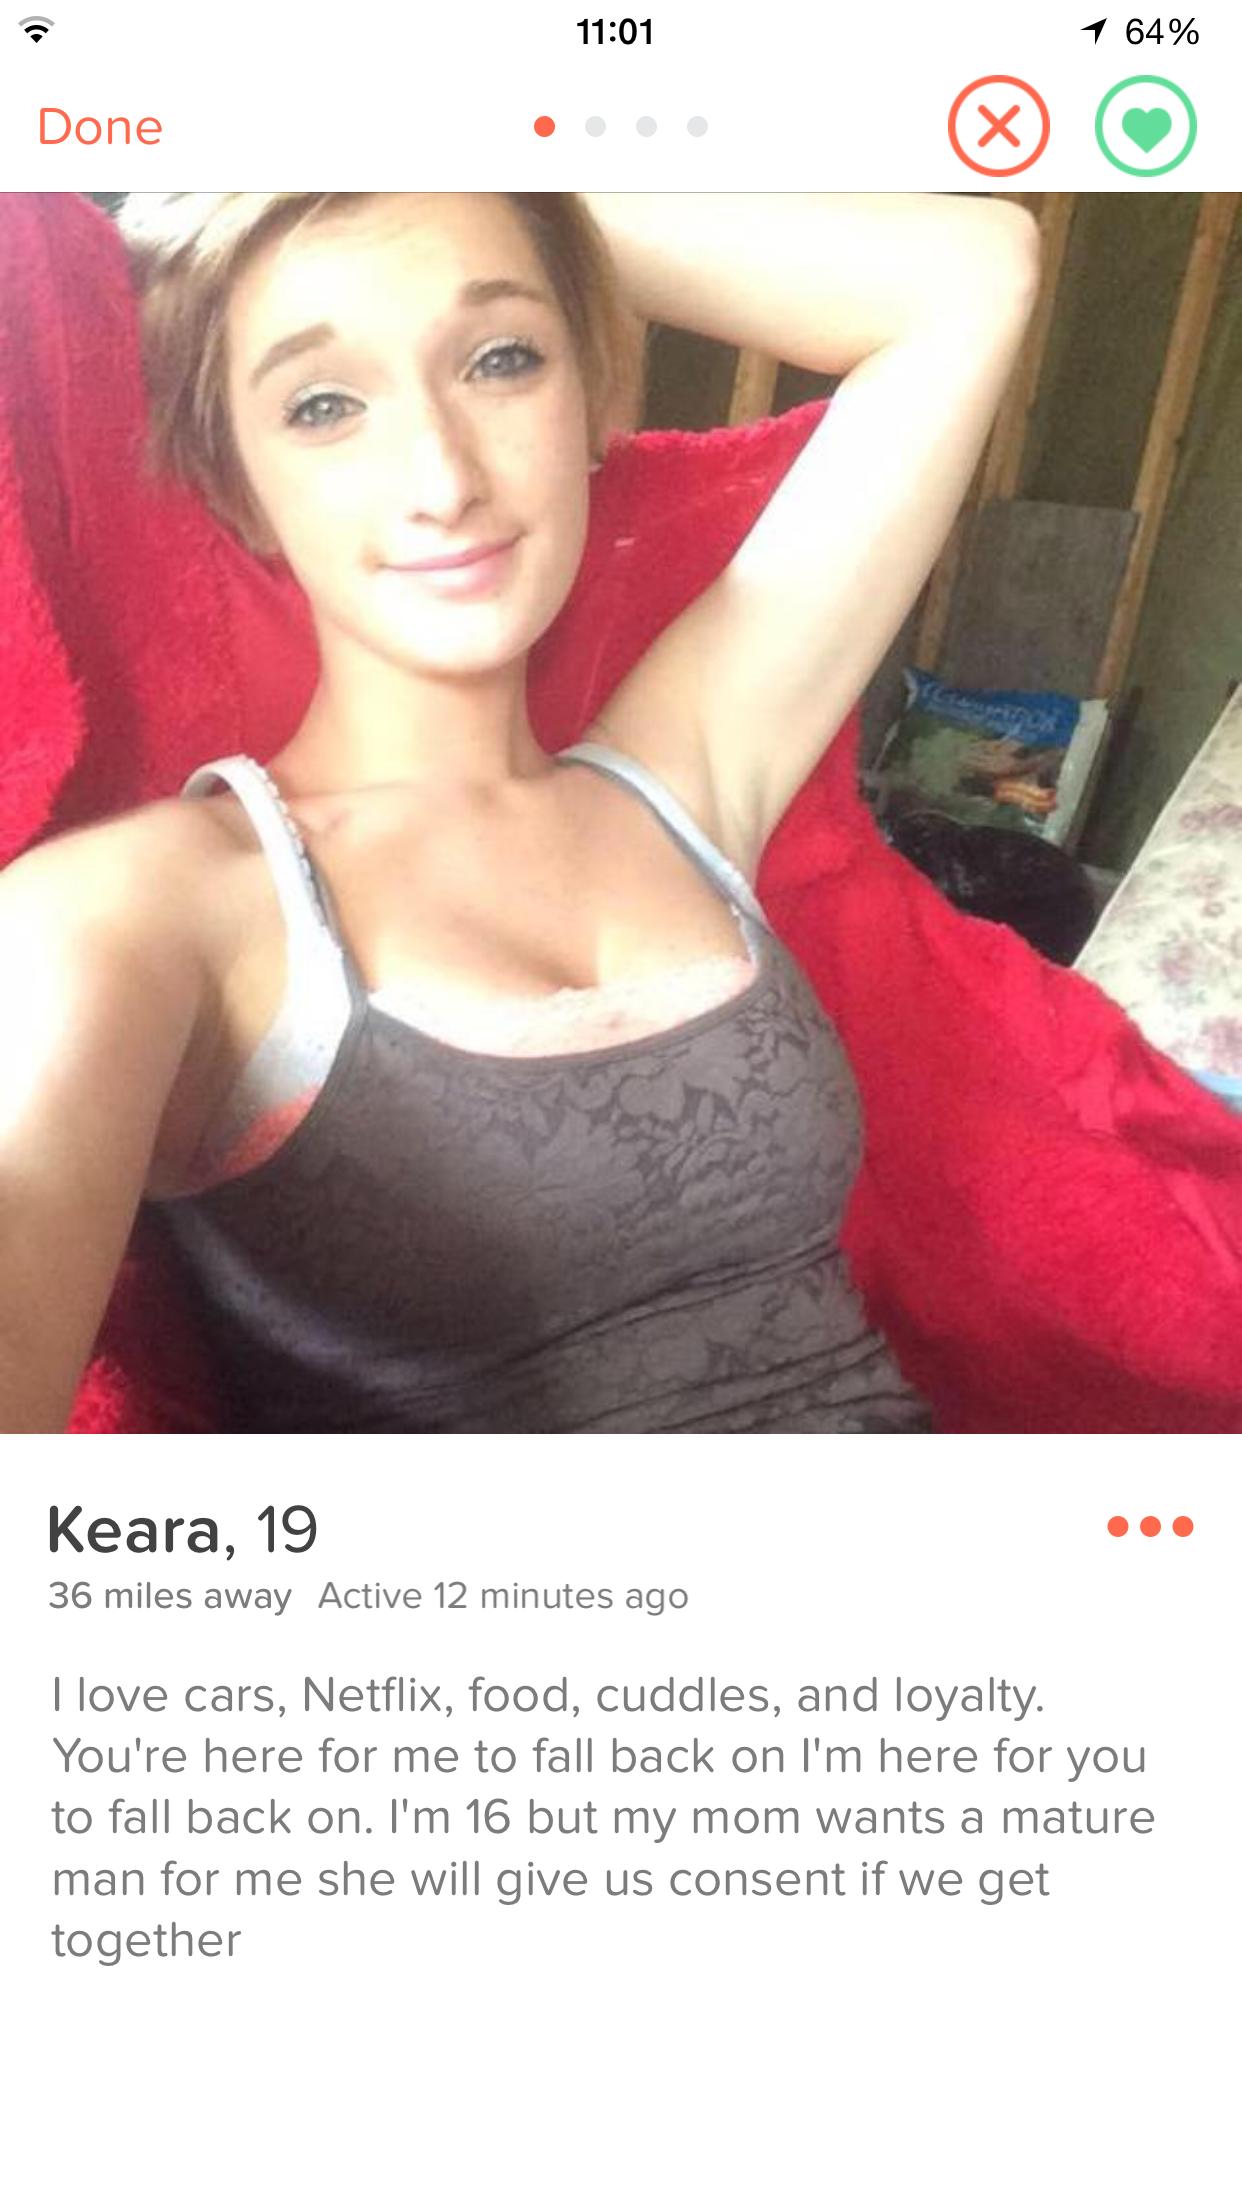 tinder - tinder bitches - 1 64% Done Keara, 19 36 miles away Active 12 minutes ago I love cars, Netflix, food, cuddles, and loyalty. You're here for me to fall back on I'm here for you to fall back on. I'm 16 but my mom wants a mature man for me she will 